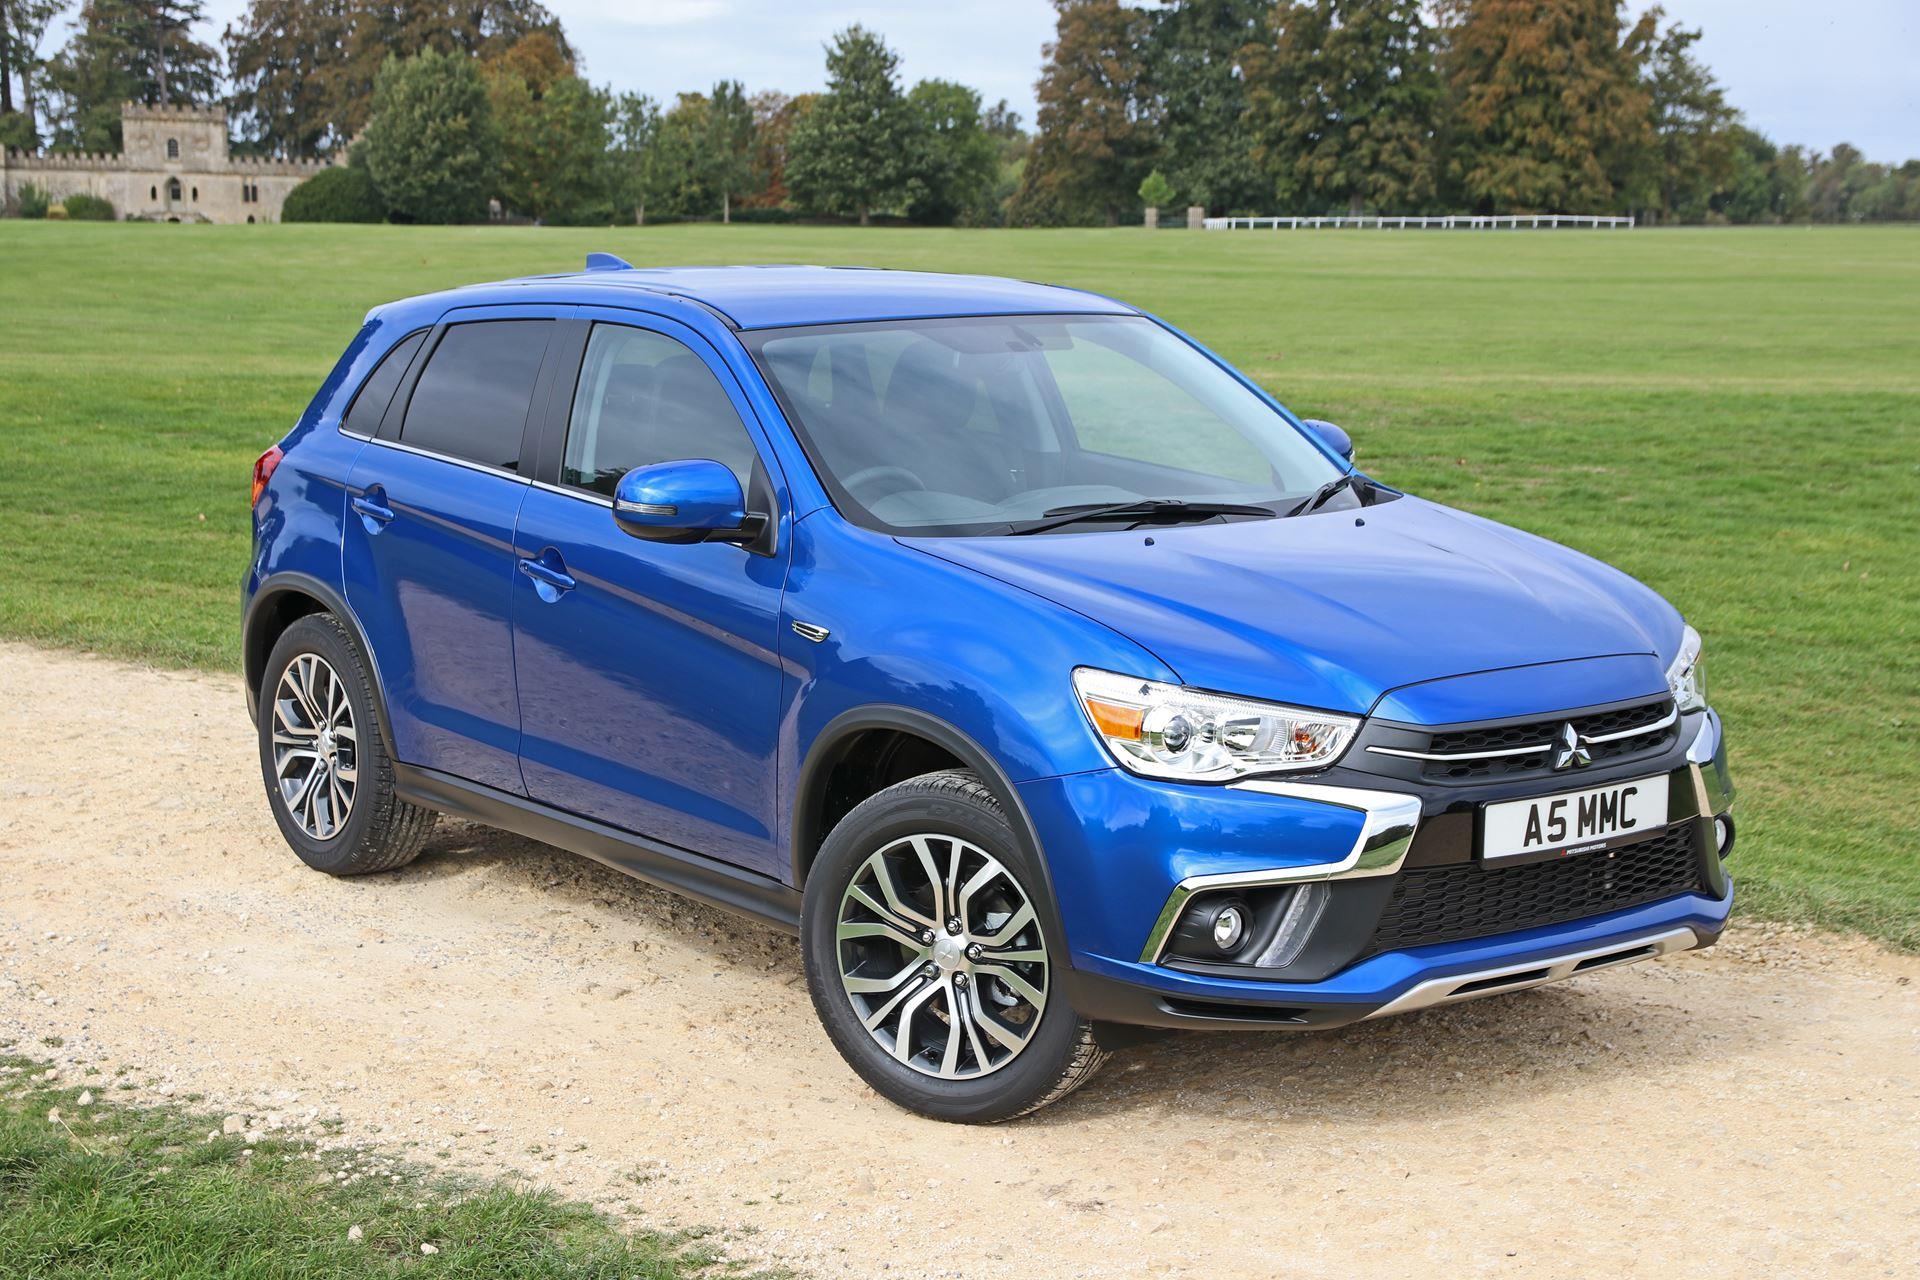 2019 Mitsubishi ASX technical and mechanical specifications